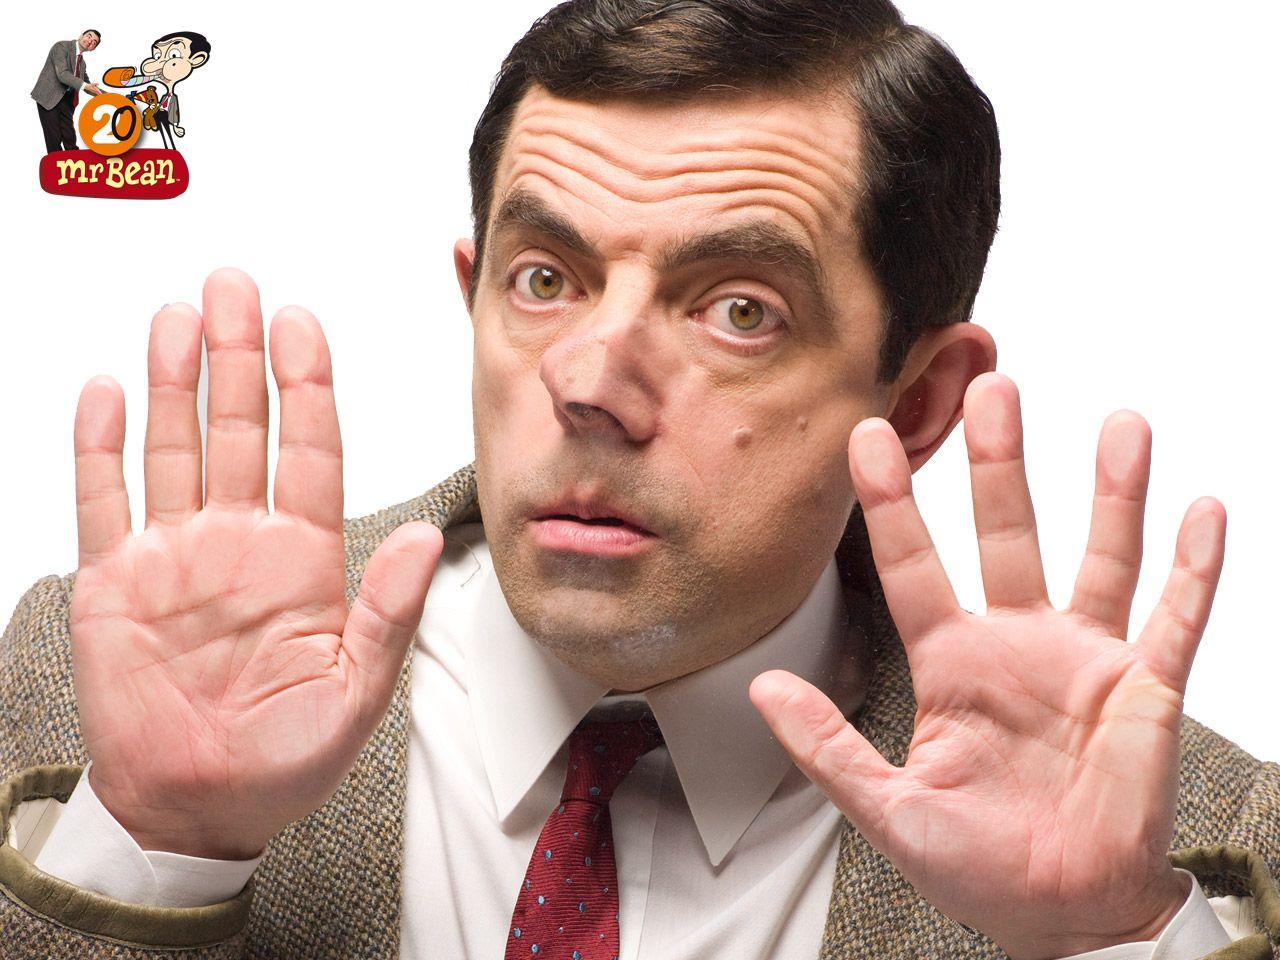 Mr Bean Wallpapers Top Free Mr Bean Backgrounds Wallpaperaccess Images And Photos Finder 